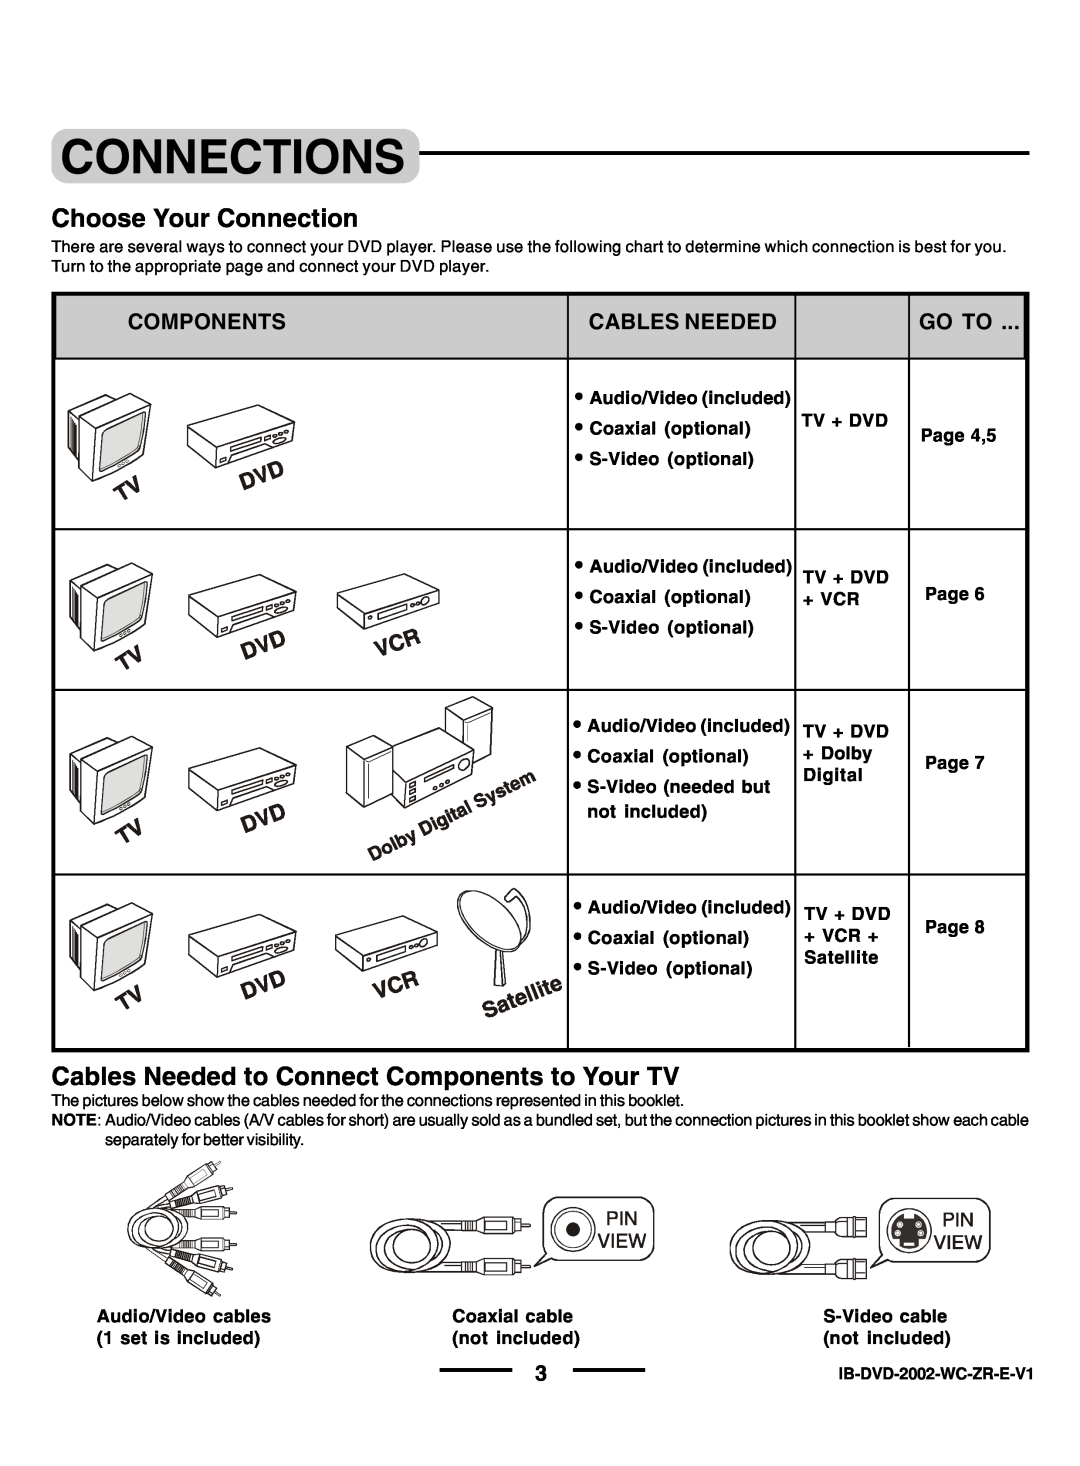 Lenoxx Electronics DVD-2002 Connections, Choose Your Connection, Cables Needed to Connect Components to Your TV 